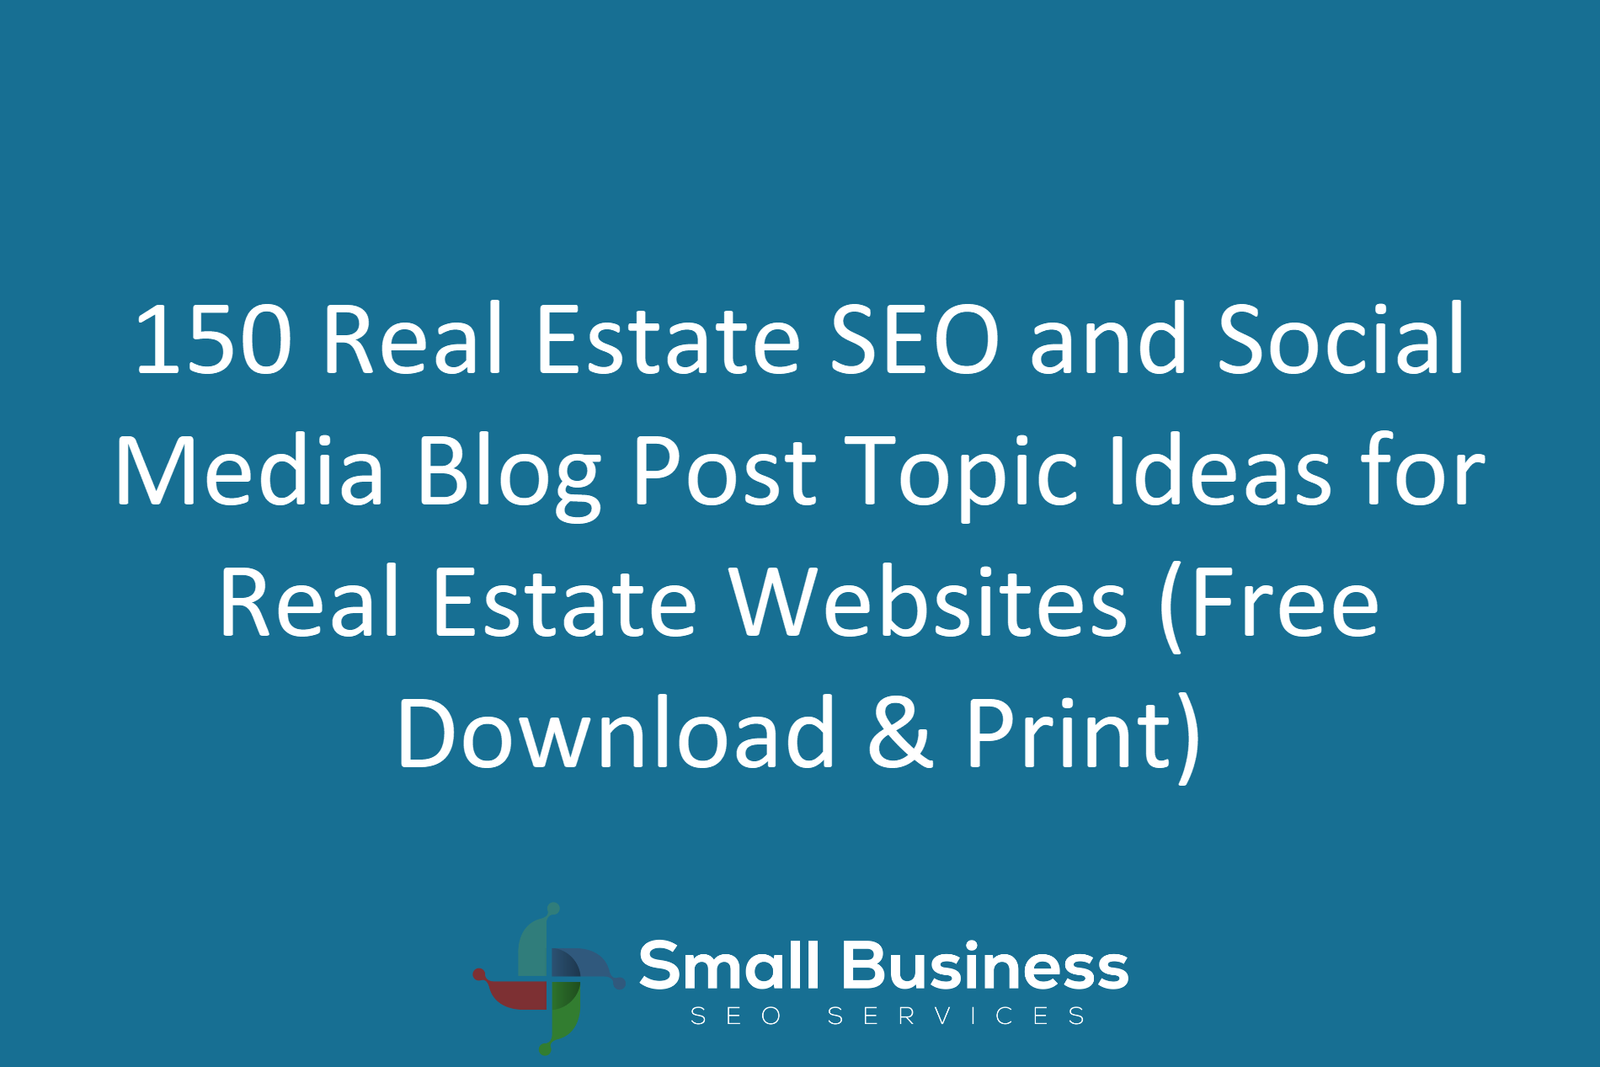 150 Real Estate SEO and Social Media Blog Post Topic Ideas for Real Estate Websites (Free Download & Print)